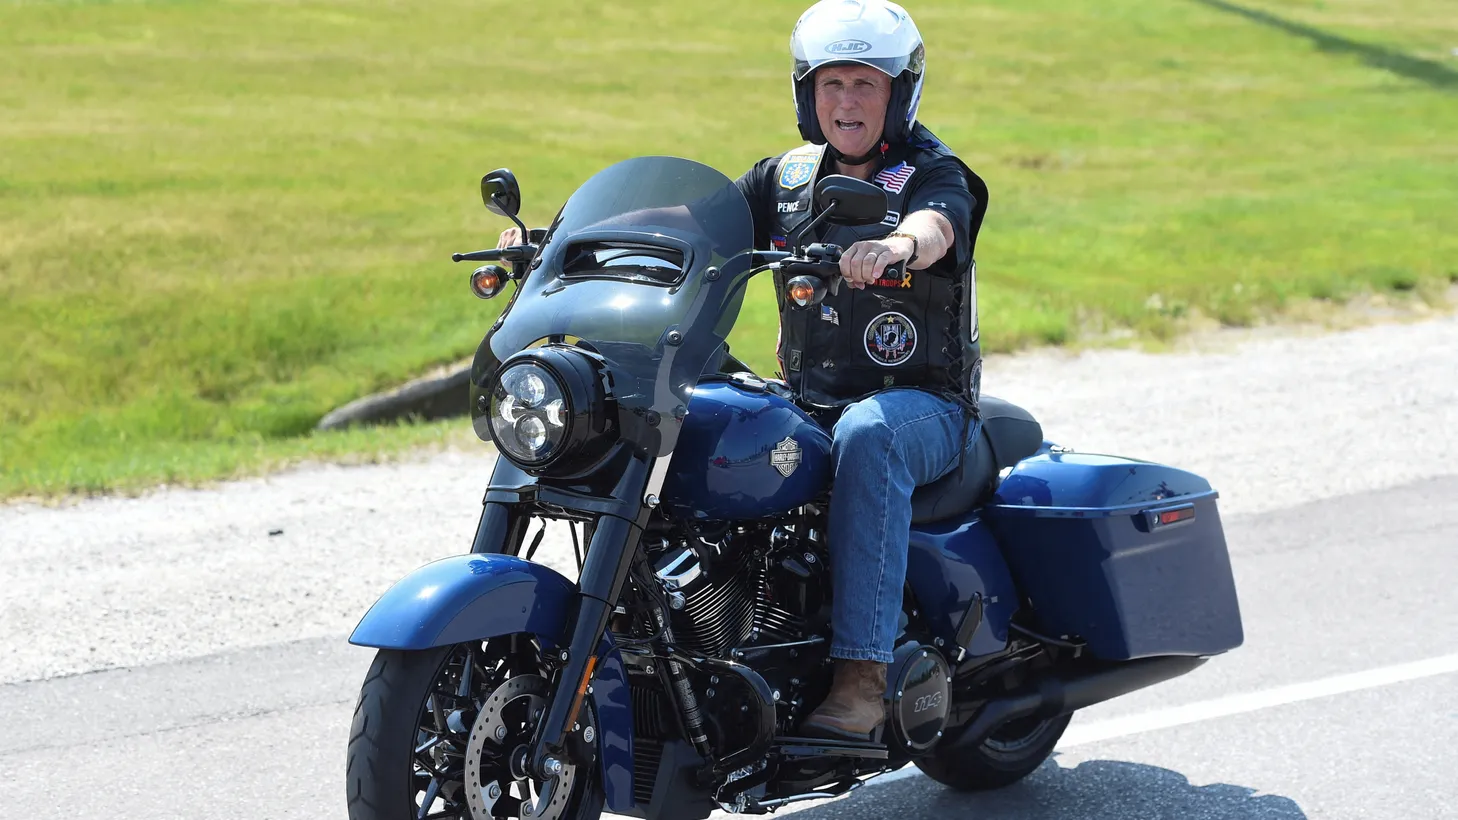 U.S. Republican presidential candidate and former U.S. Vice President Mike Pence rides a motorcycle during the "Roast and Ride" event hosted by U.S. Senator Joni Ernst in Des Moines, Iowa, U.S. June 3, 2023.